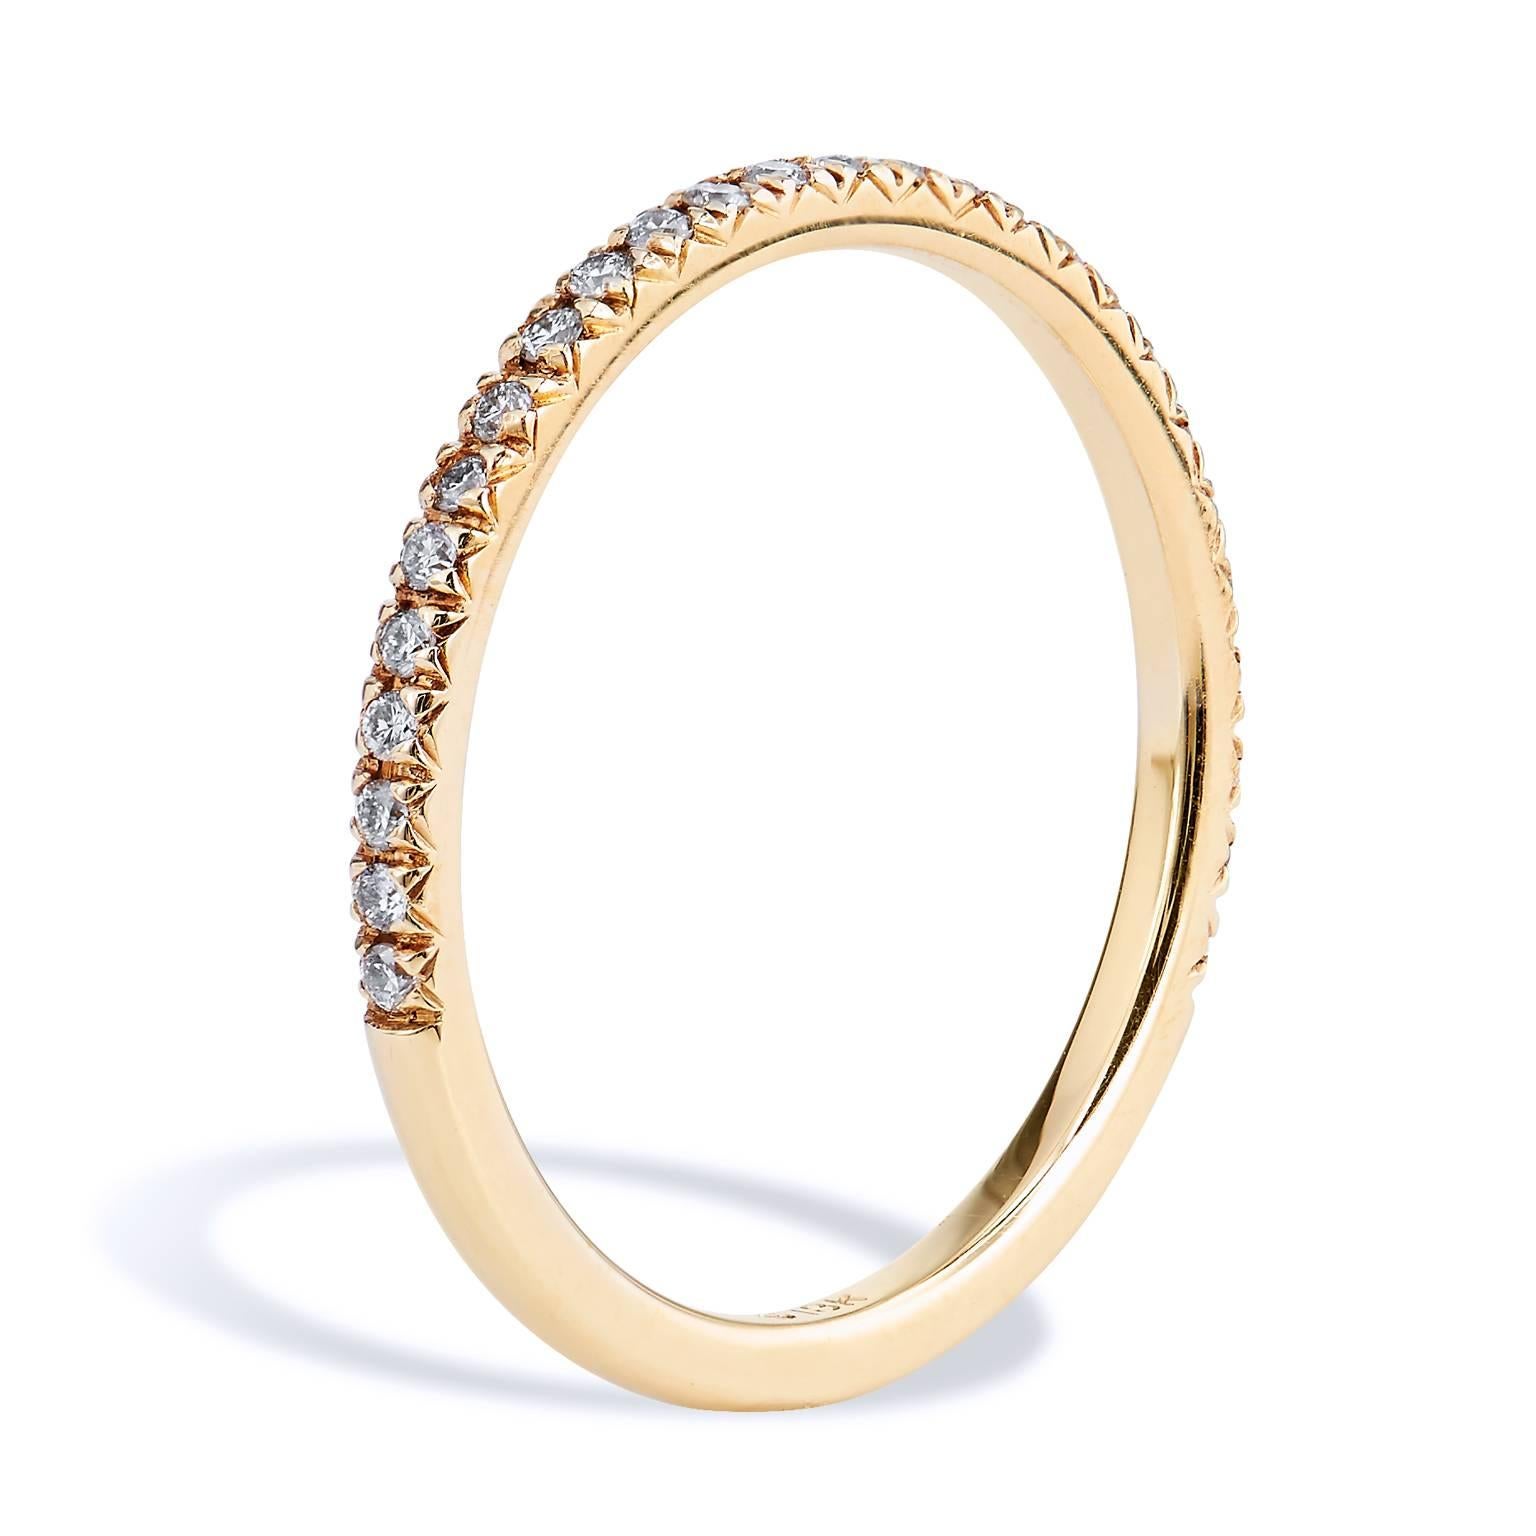 This diamond band ring features twenty-seven pieces of diamond pave set with a total weight of 0.14 carat (G/H/VS). Affixed to a 1.50 mm 18 karat yellow gold band, the split V detail, opens the eye, allows the ring to pop with light.